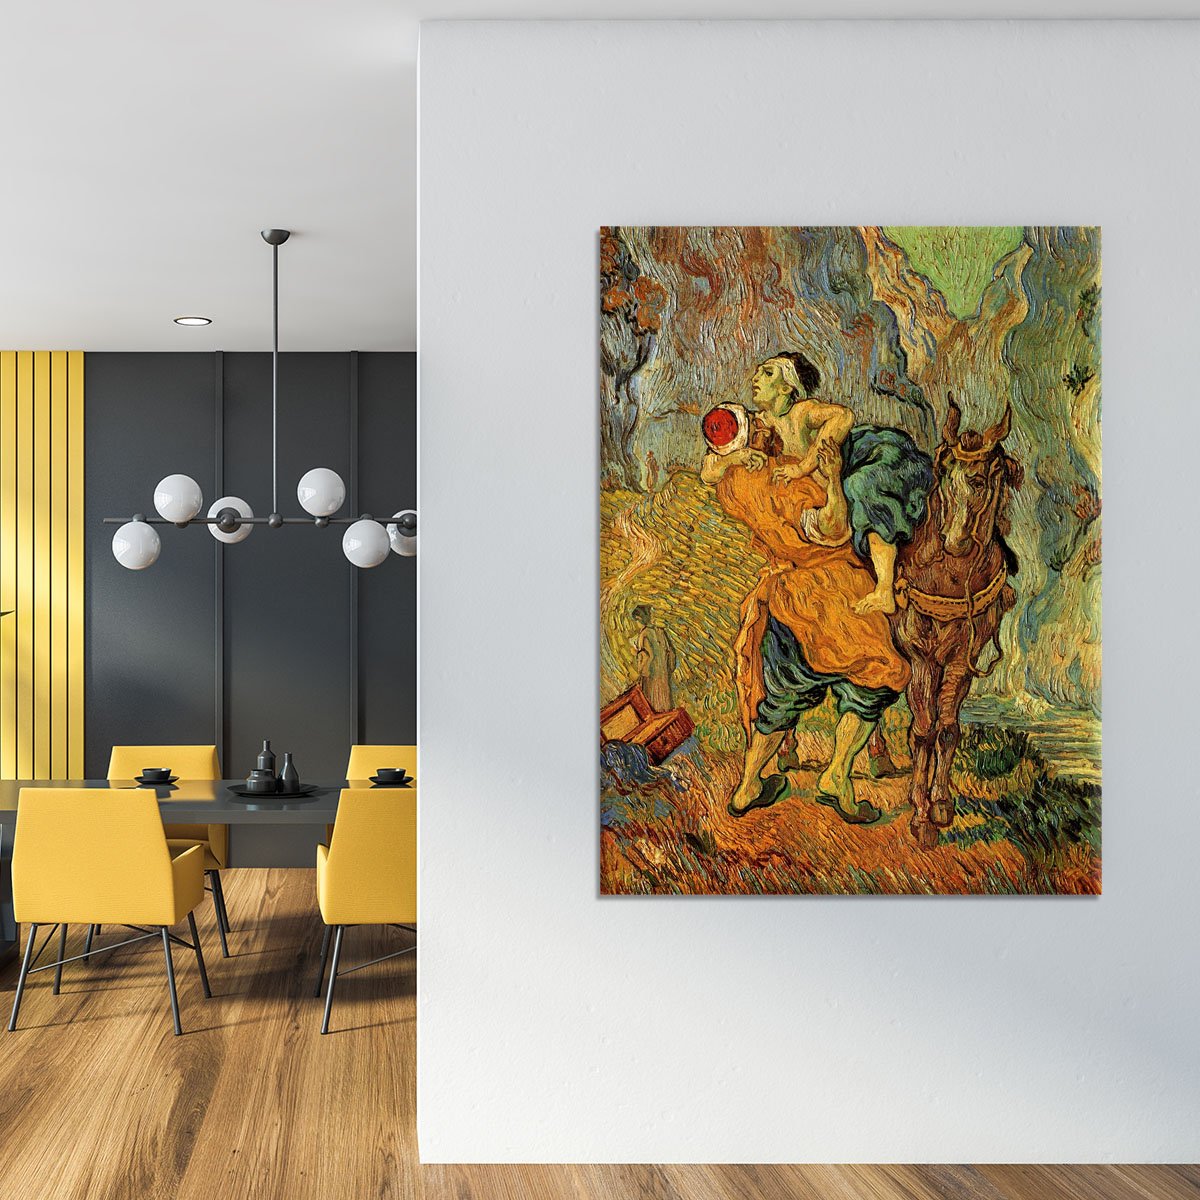 The Good Samaritan after Delacroix by Van Gogh Canvas Print or Poster